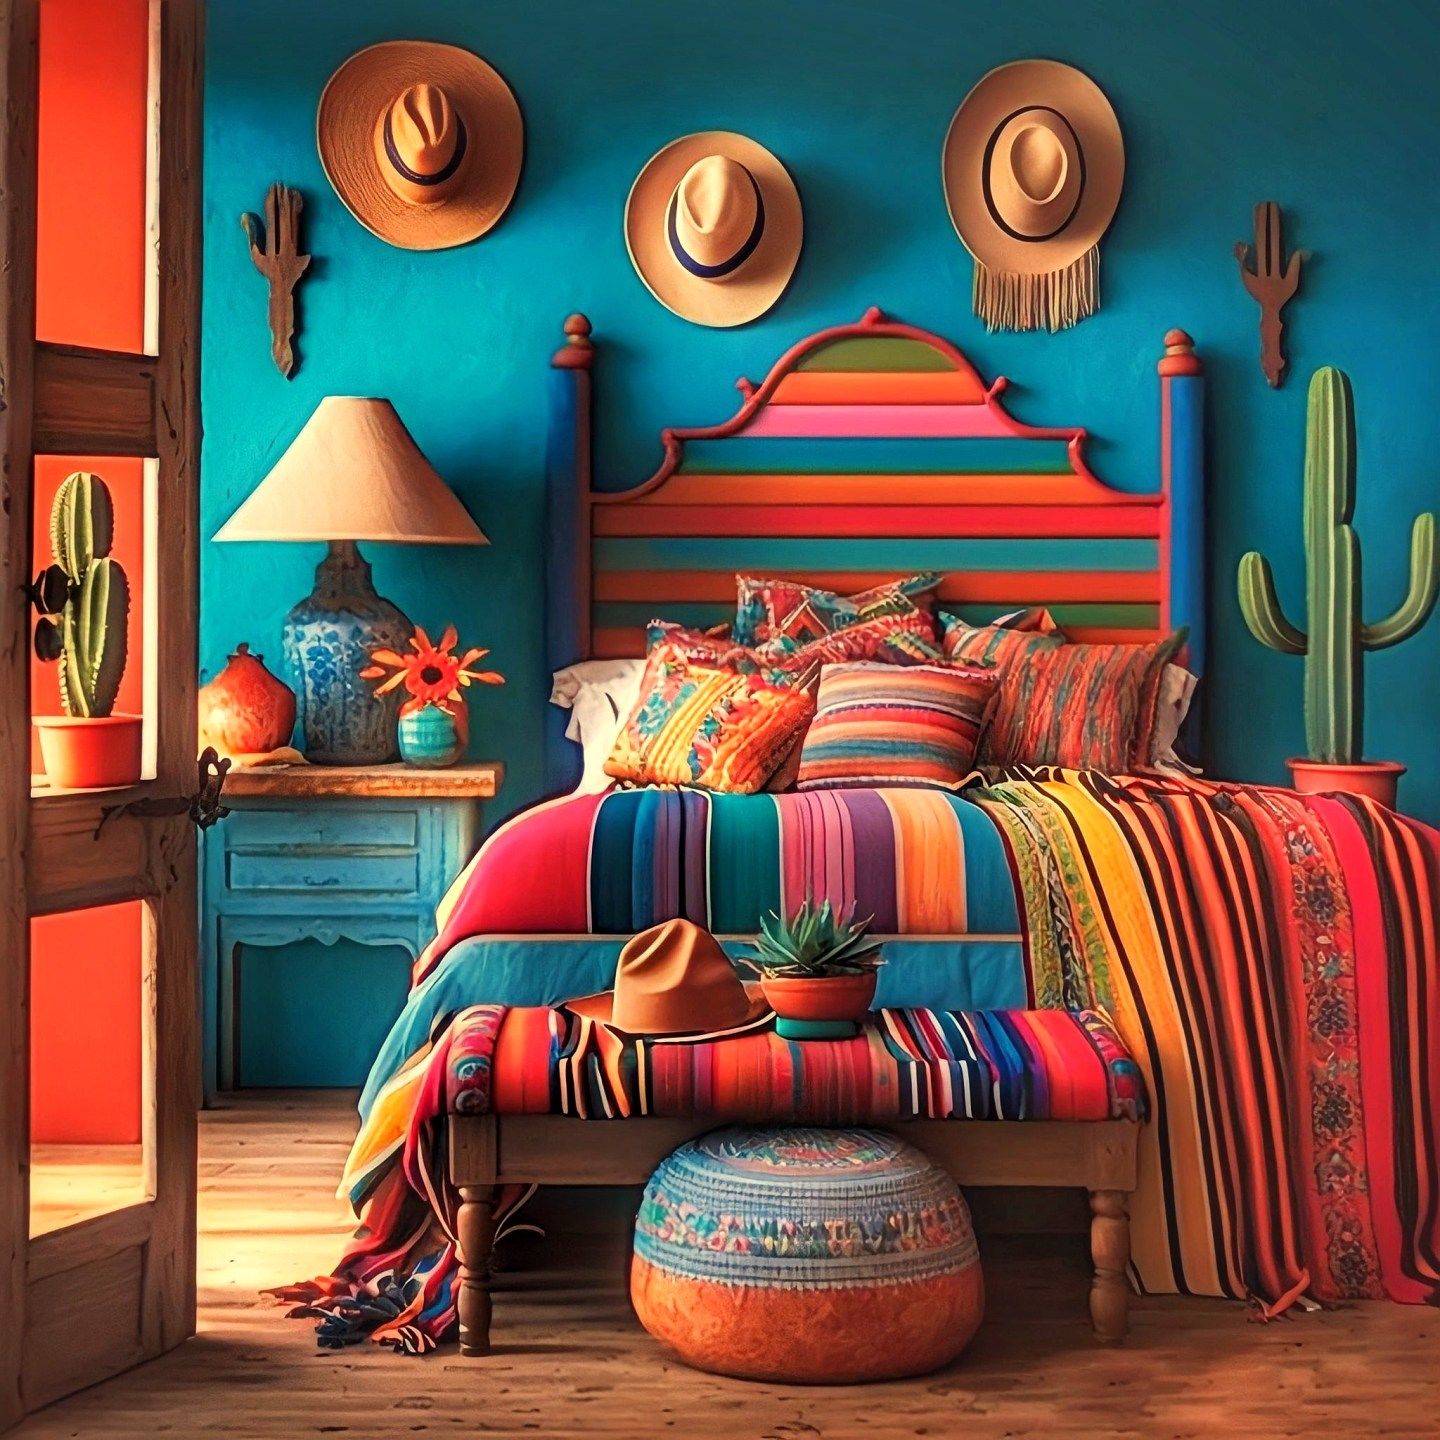 Mexican Furniture : Traditional and Stylish Mexican Furniture Options for Your Home Decor